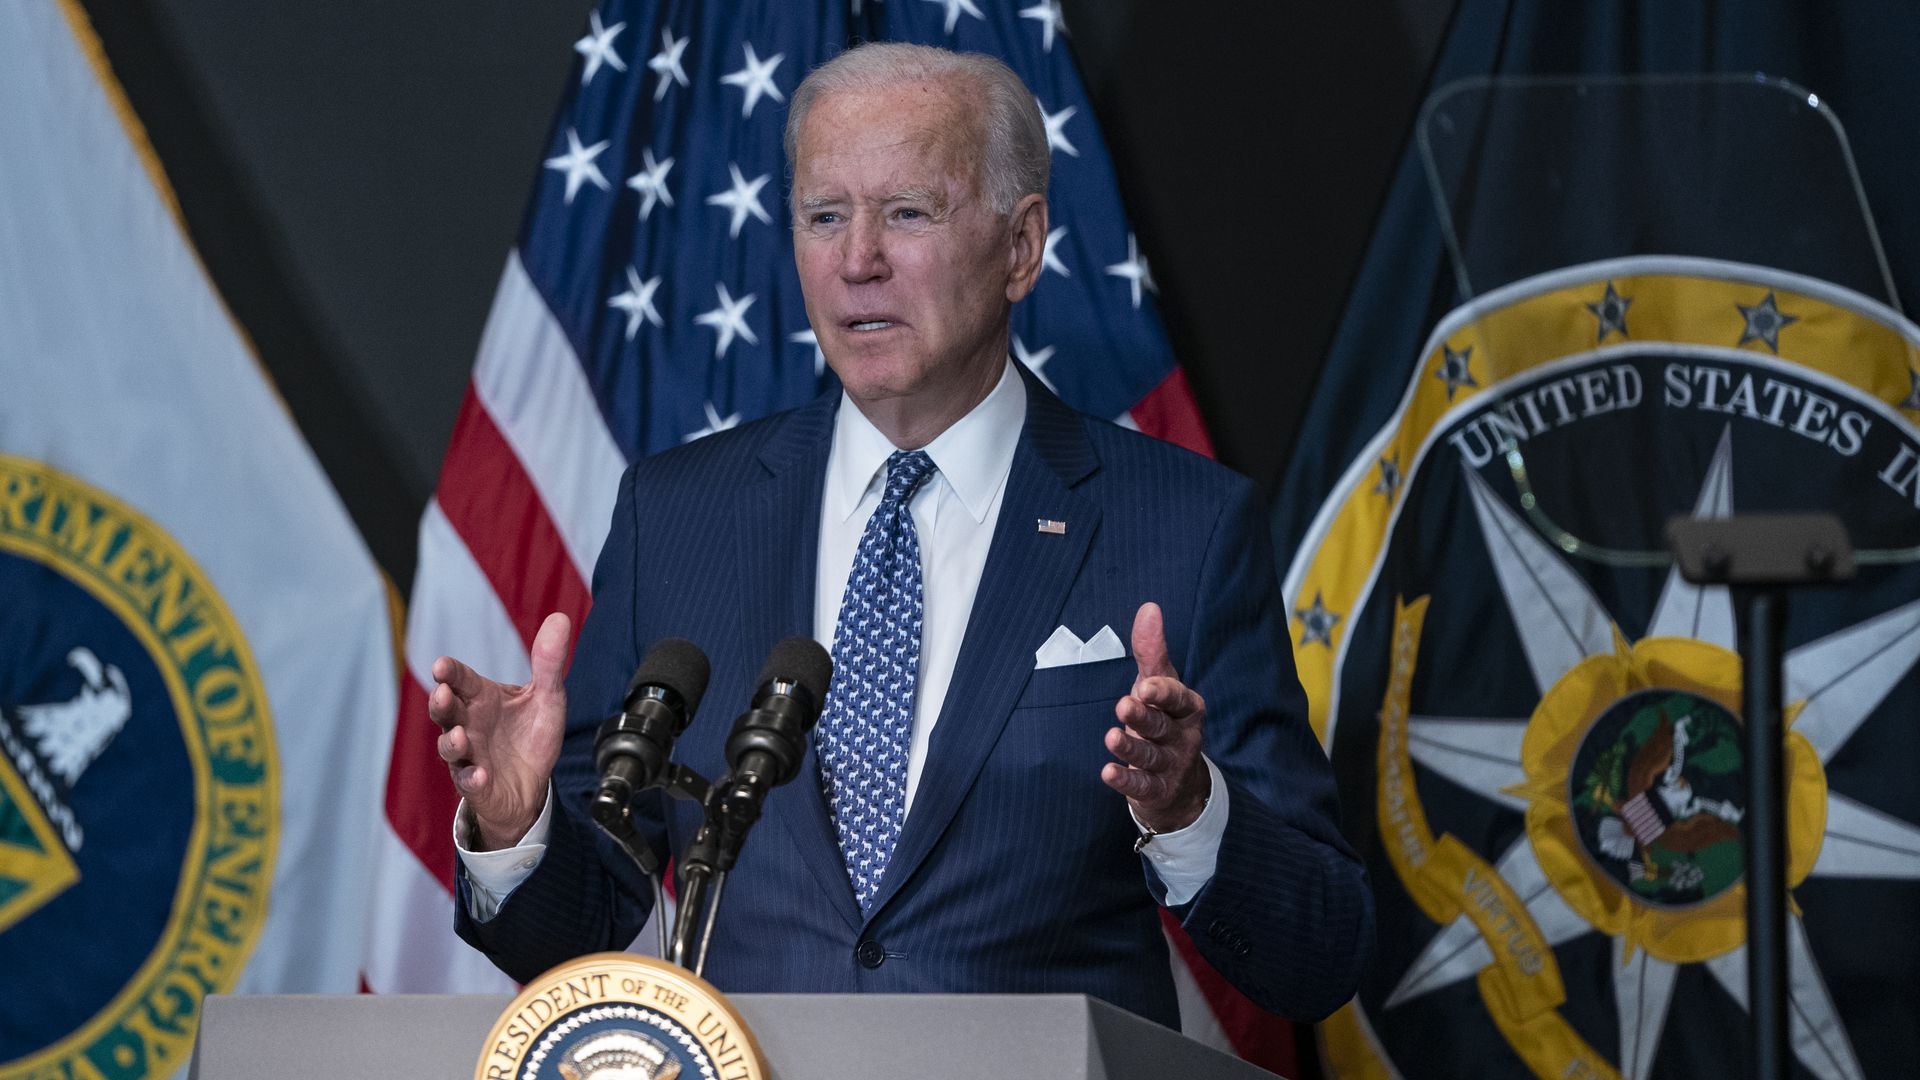 President Joe Biden delivers remarks while visiting the Office of the Director Of National Intelligence (DNI) headquarters in McLean, Virginia on Tuesday